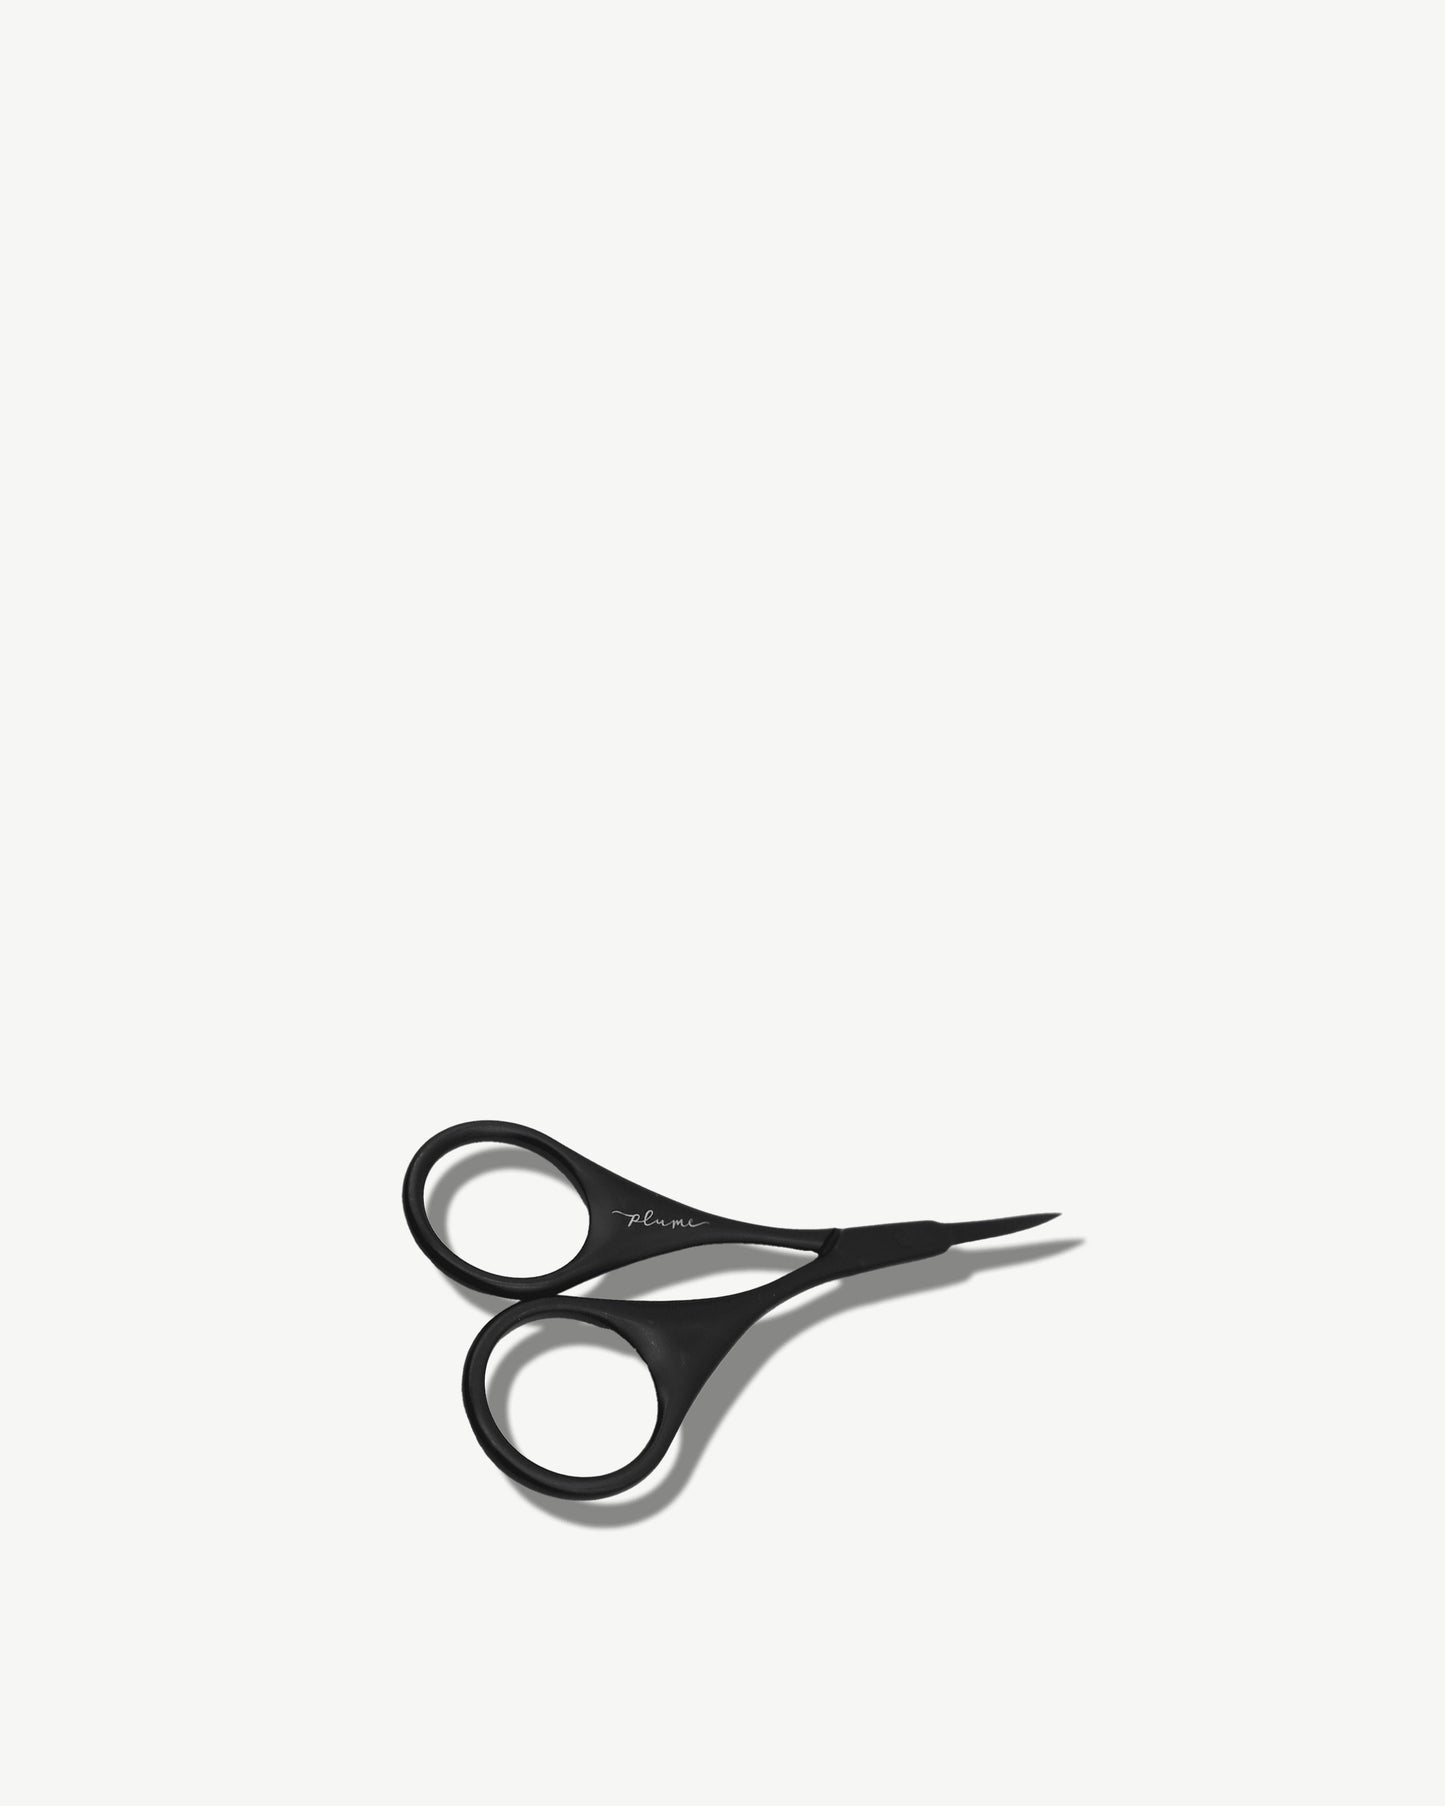 Brow Scissors Gold Collection w/ Brush, Size: One Size